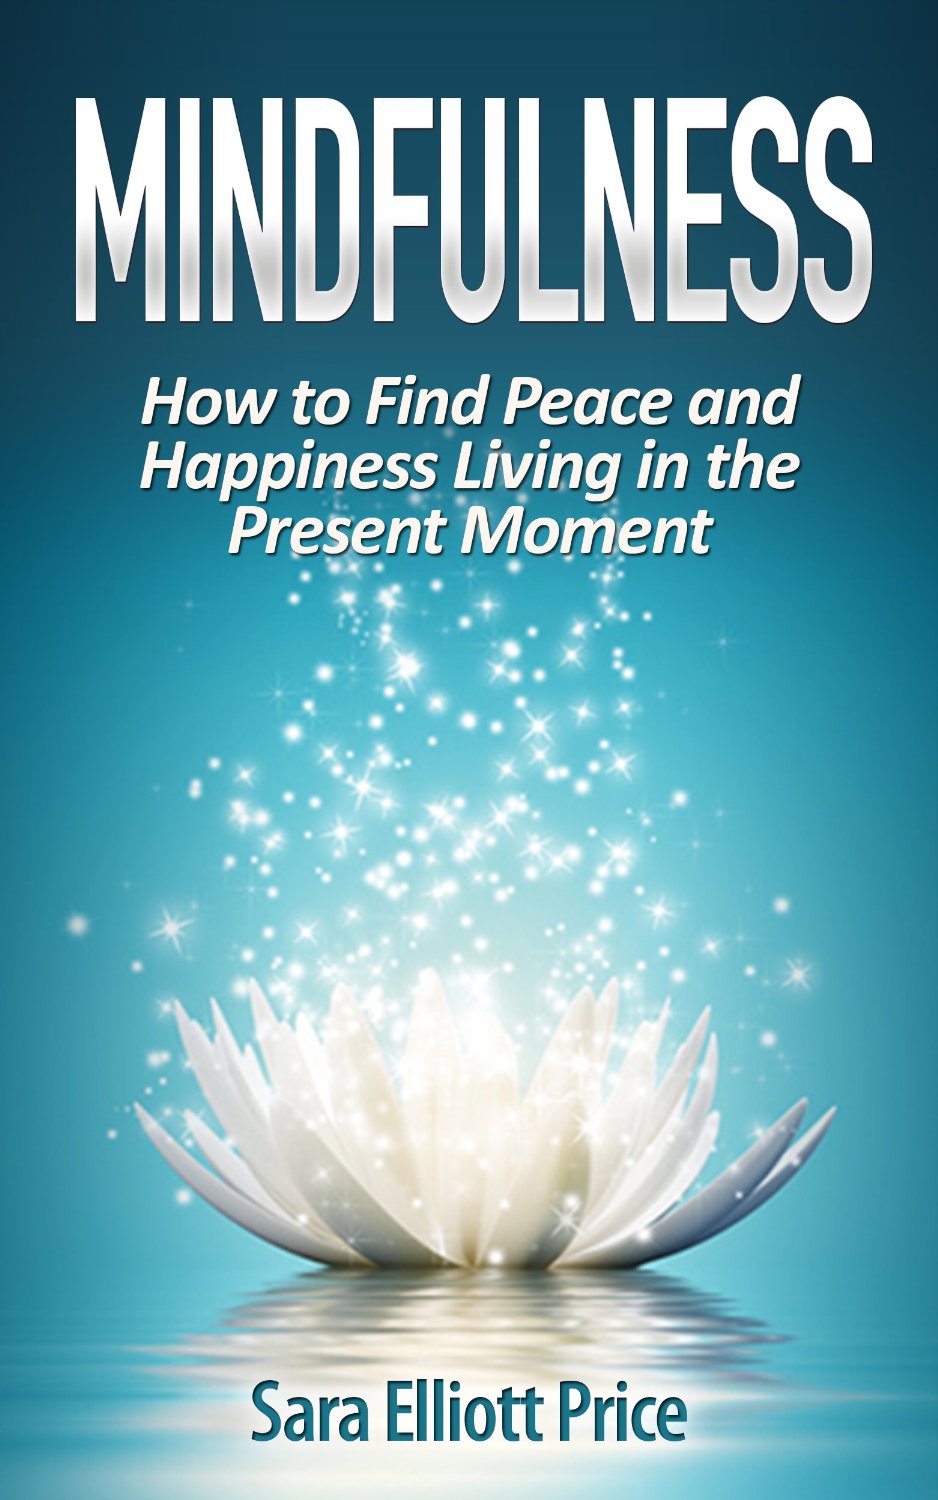 Mindfulness: How to Find Peace and Happiness Living in the Present Moment by Sara Elliott Price